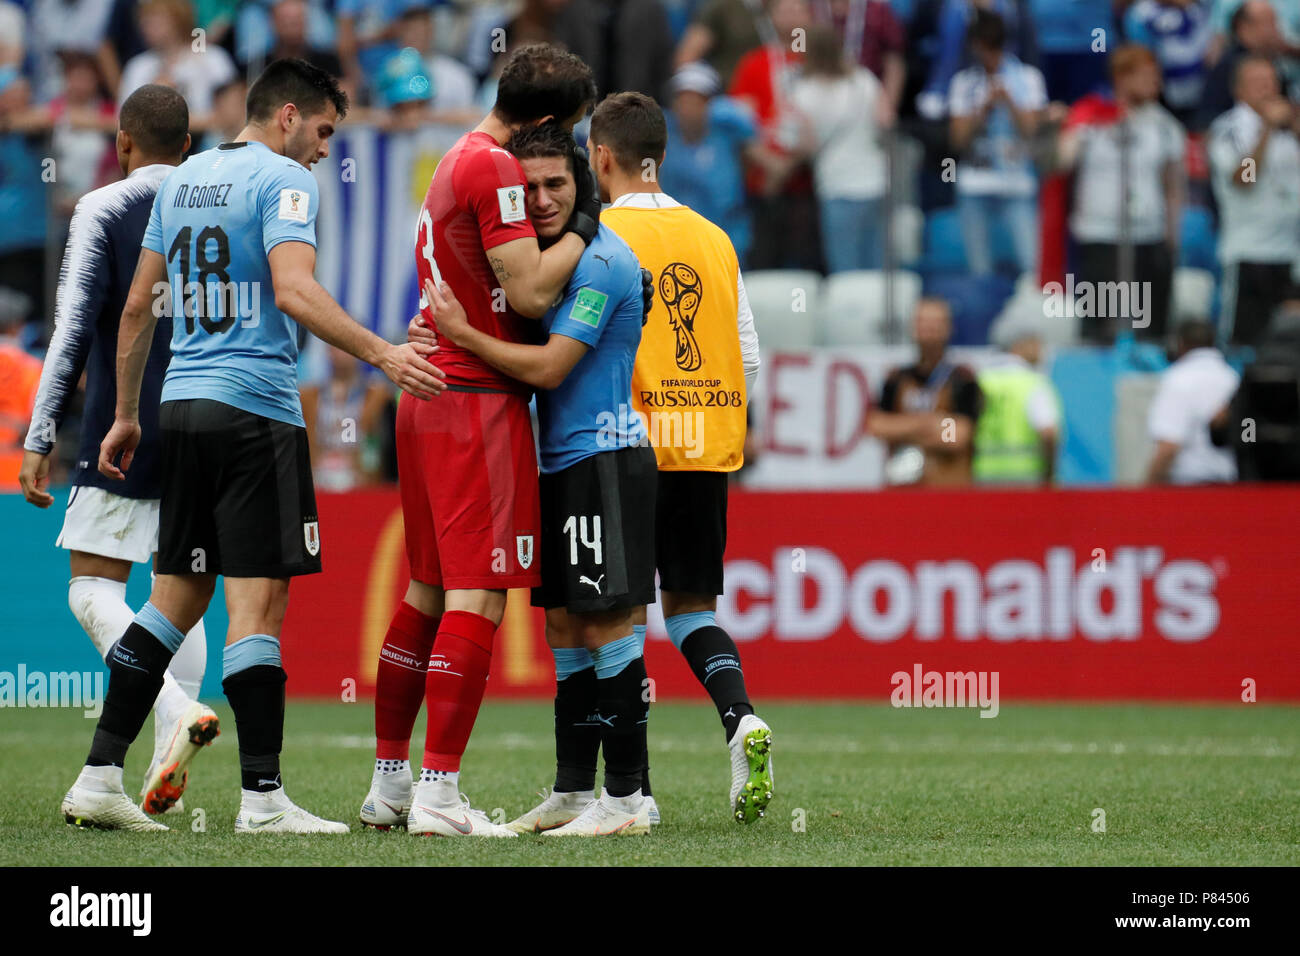 NIZHNY NOVGOROD, RUSSIA - JULY 6: Maximiliano Gomez (N18), Fernando Muslera and Lucas Torreira (N14) of Uruguay national team after the 2018 FIFA World Cup Russia Quarter Final match between Uruguay and France at Nizhny Novgorod Stadium on July 6, 2018 in Nizhny Novgorod, Russia. (MB Media) Stock Photo